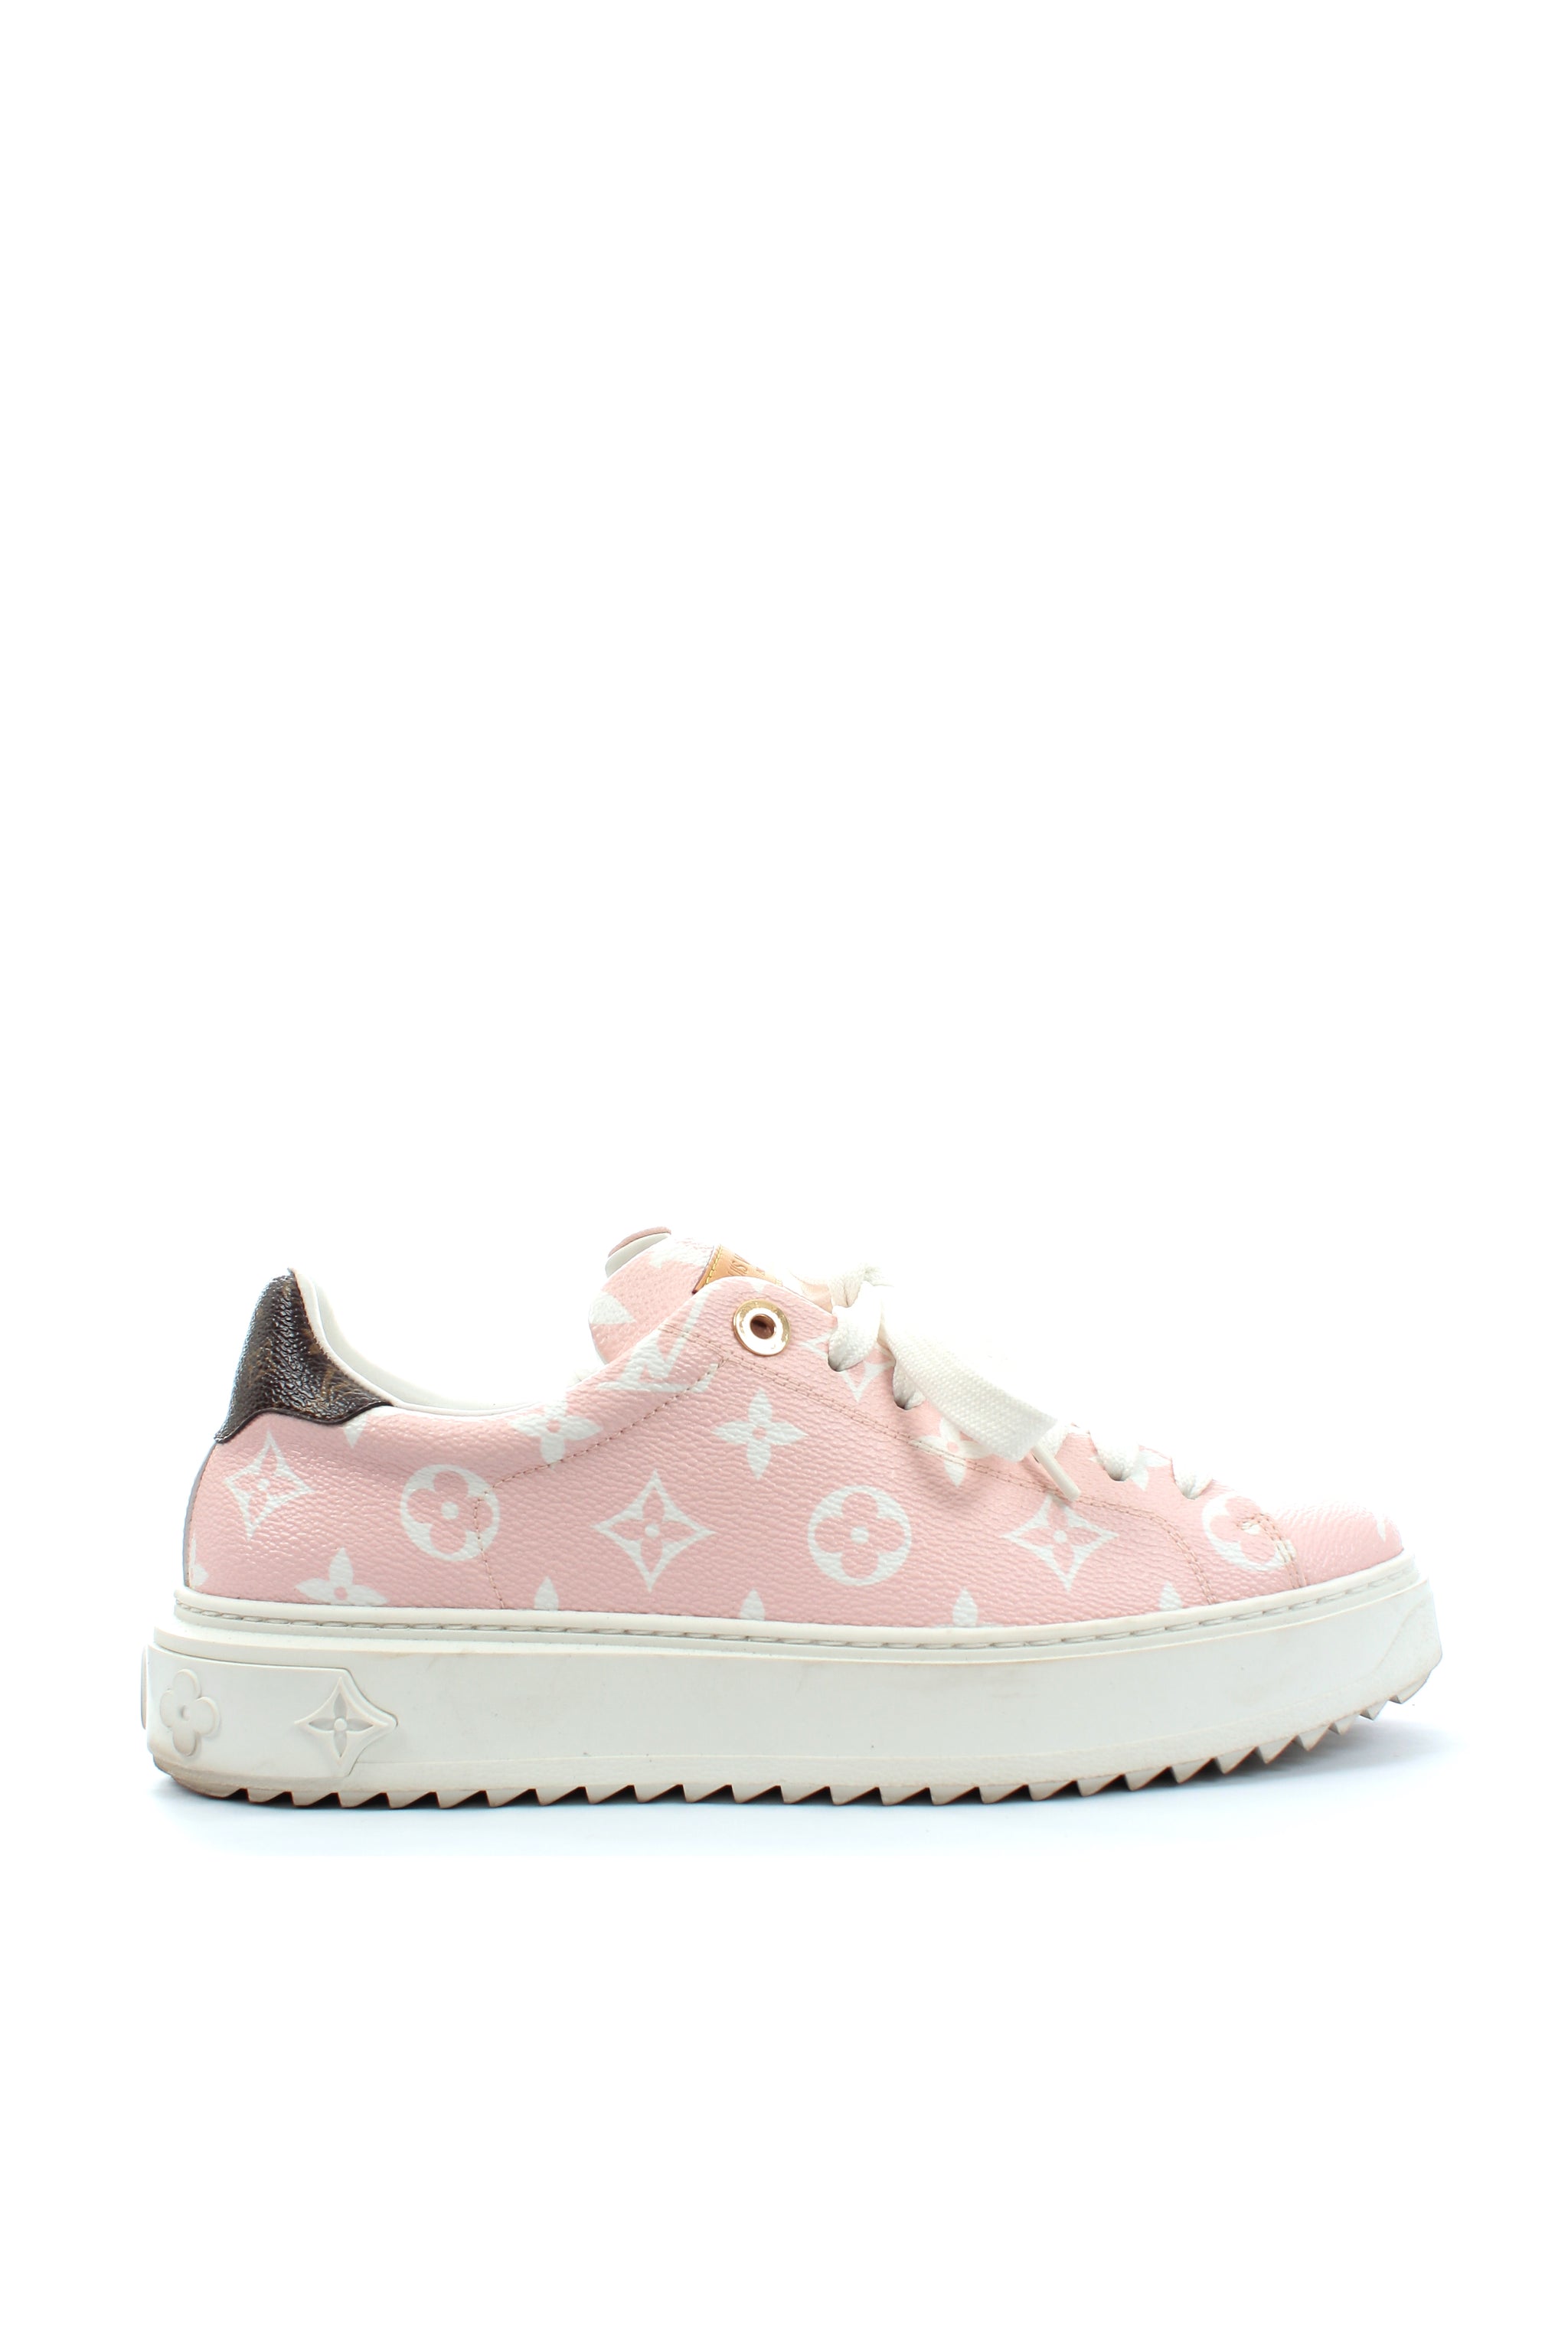 time out louis vuitton sneakers